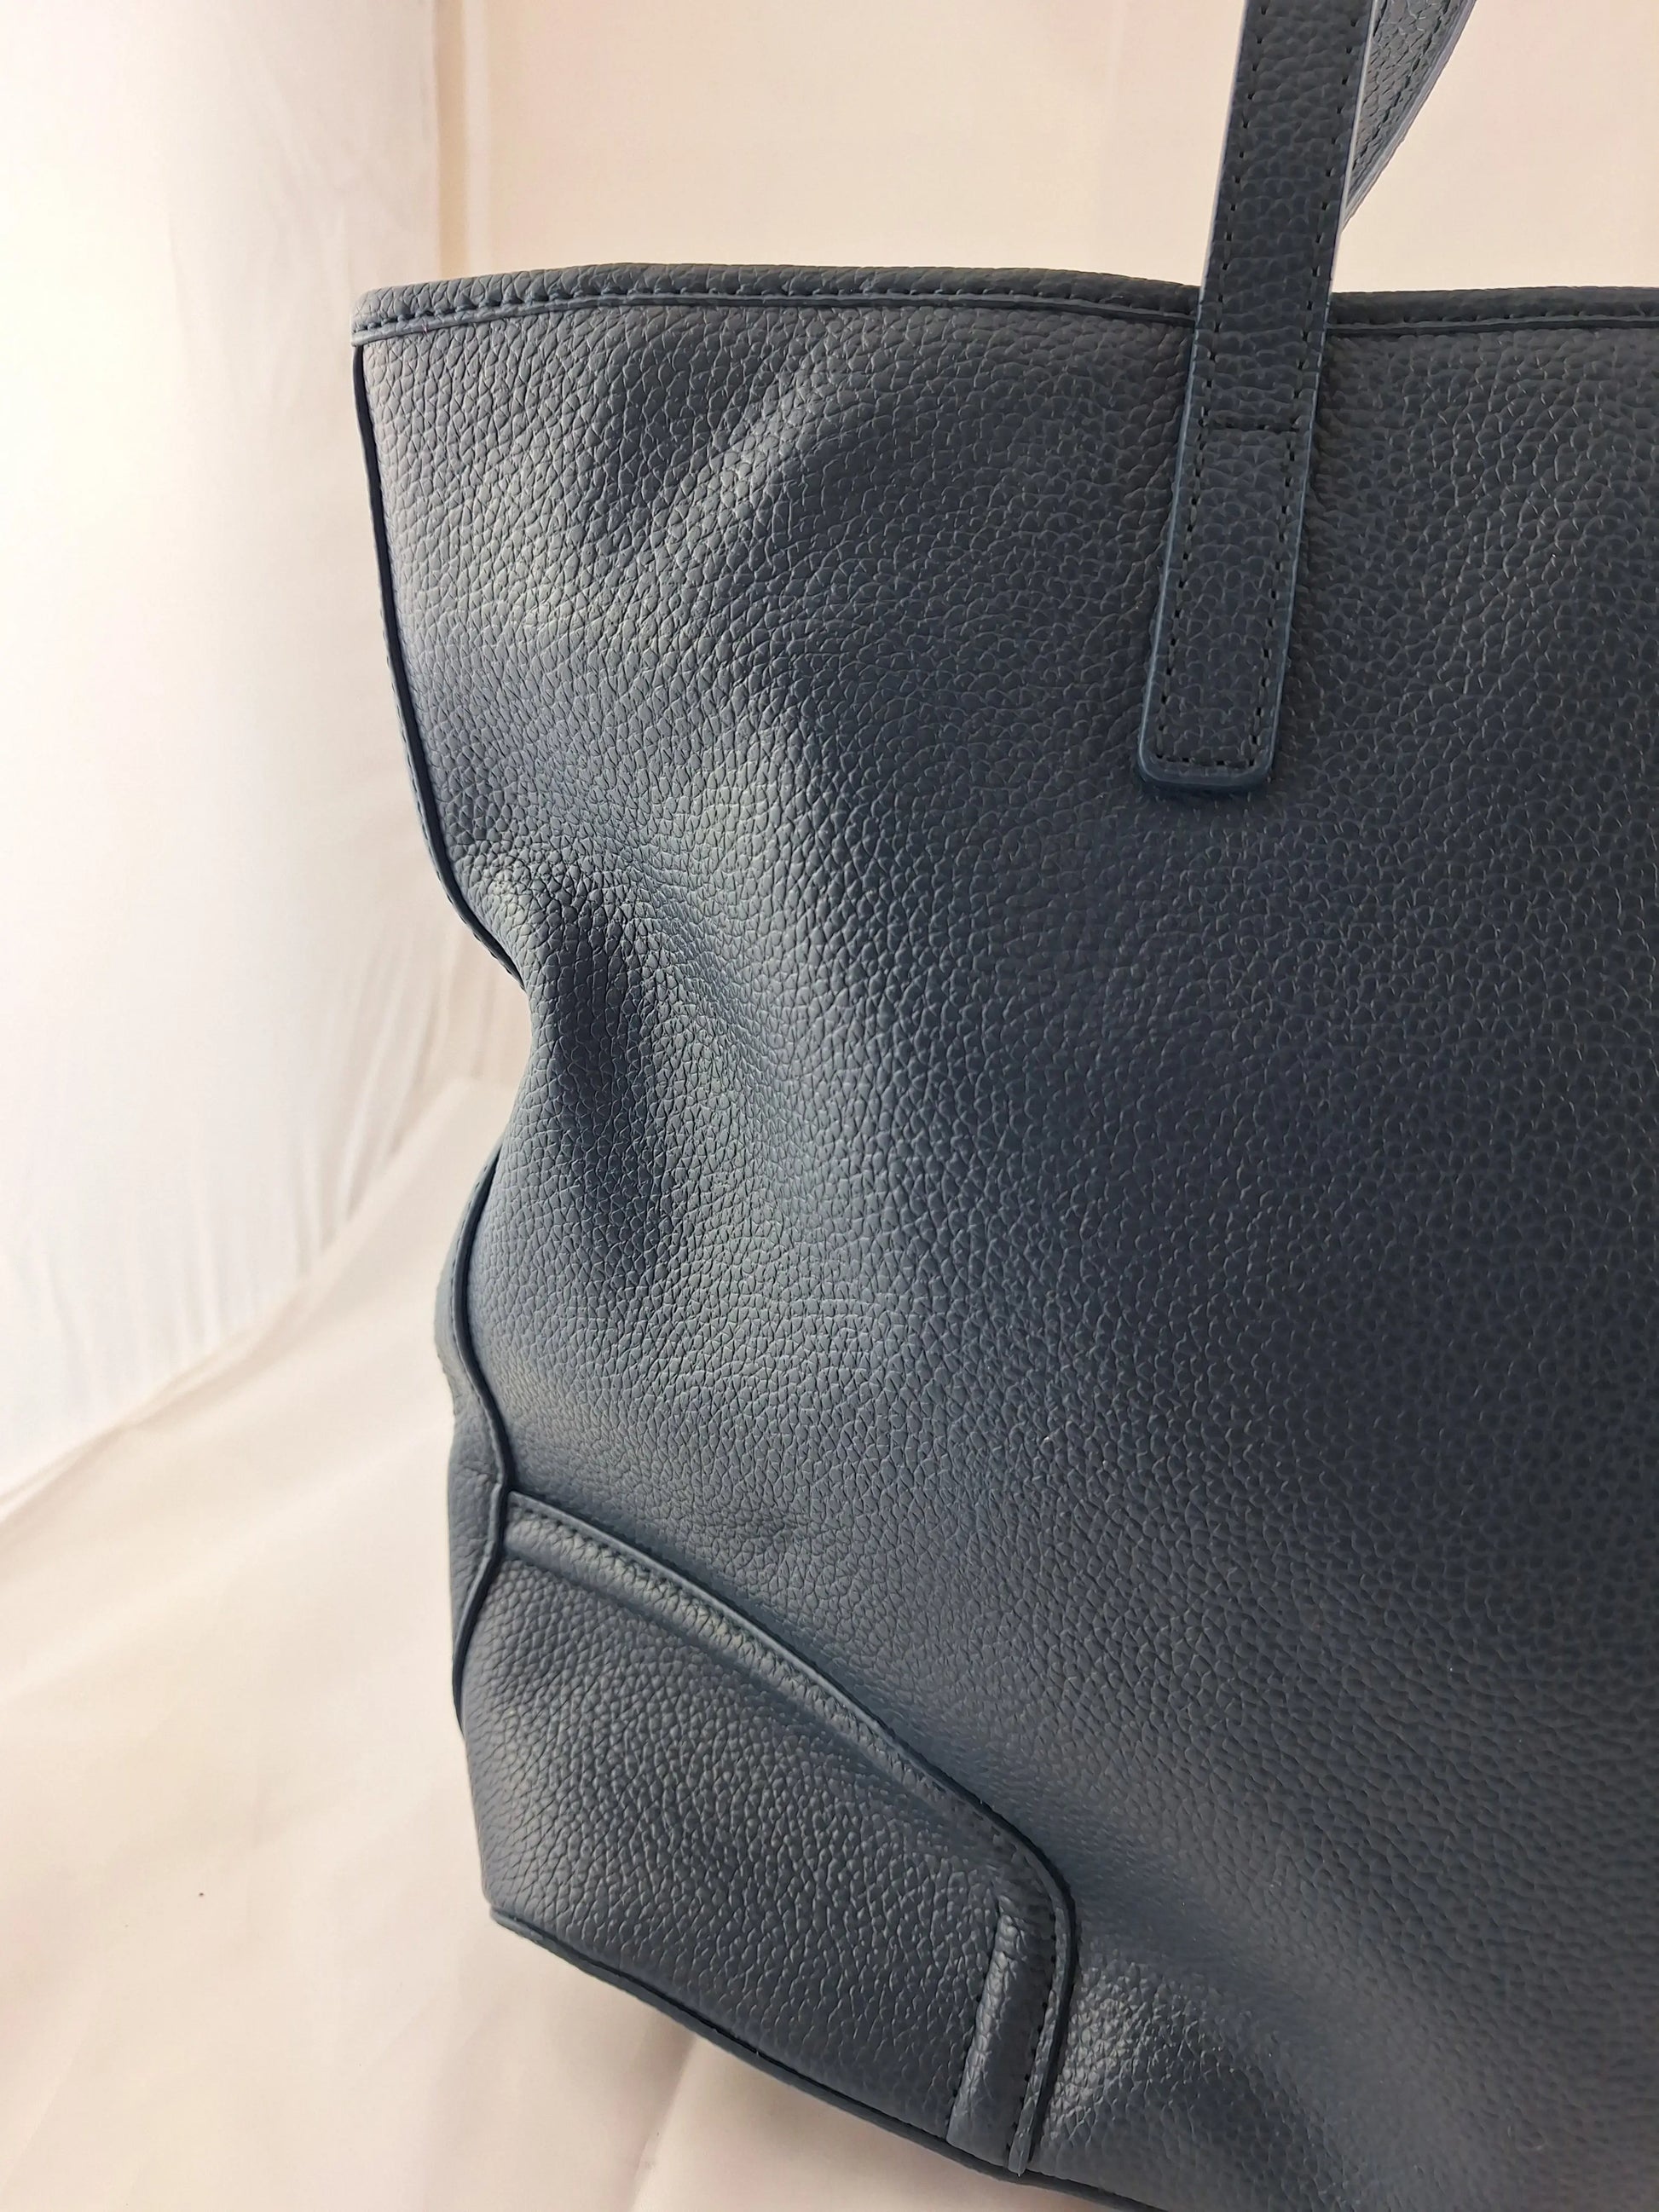 Oroton Oroton Essential Pebbled Leather Tote Bag by SwapUp-Online Second Hand Store-Online Thrift Store